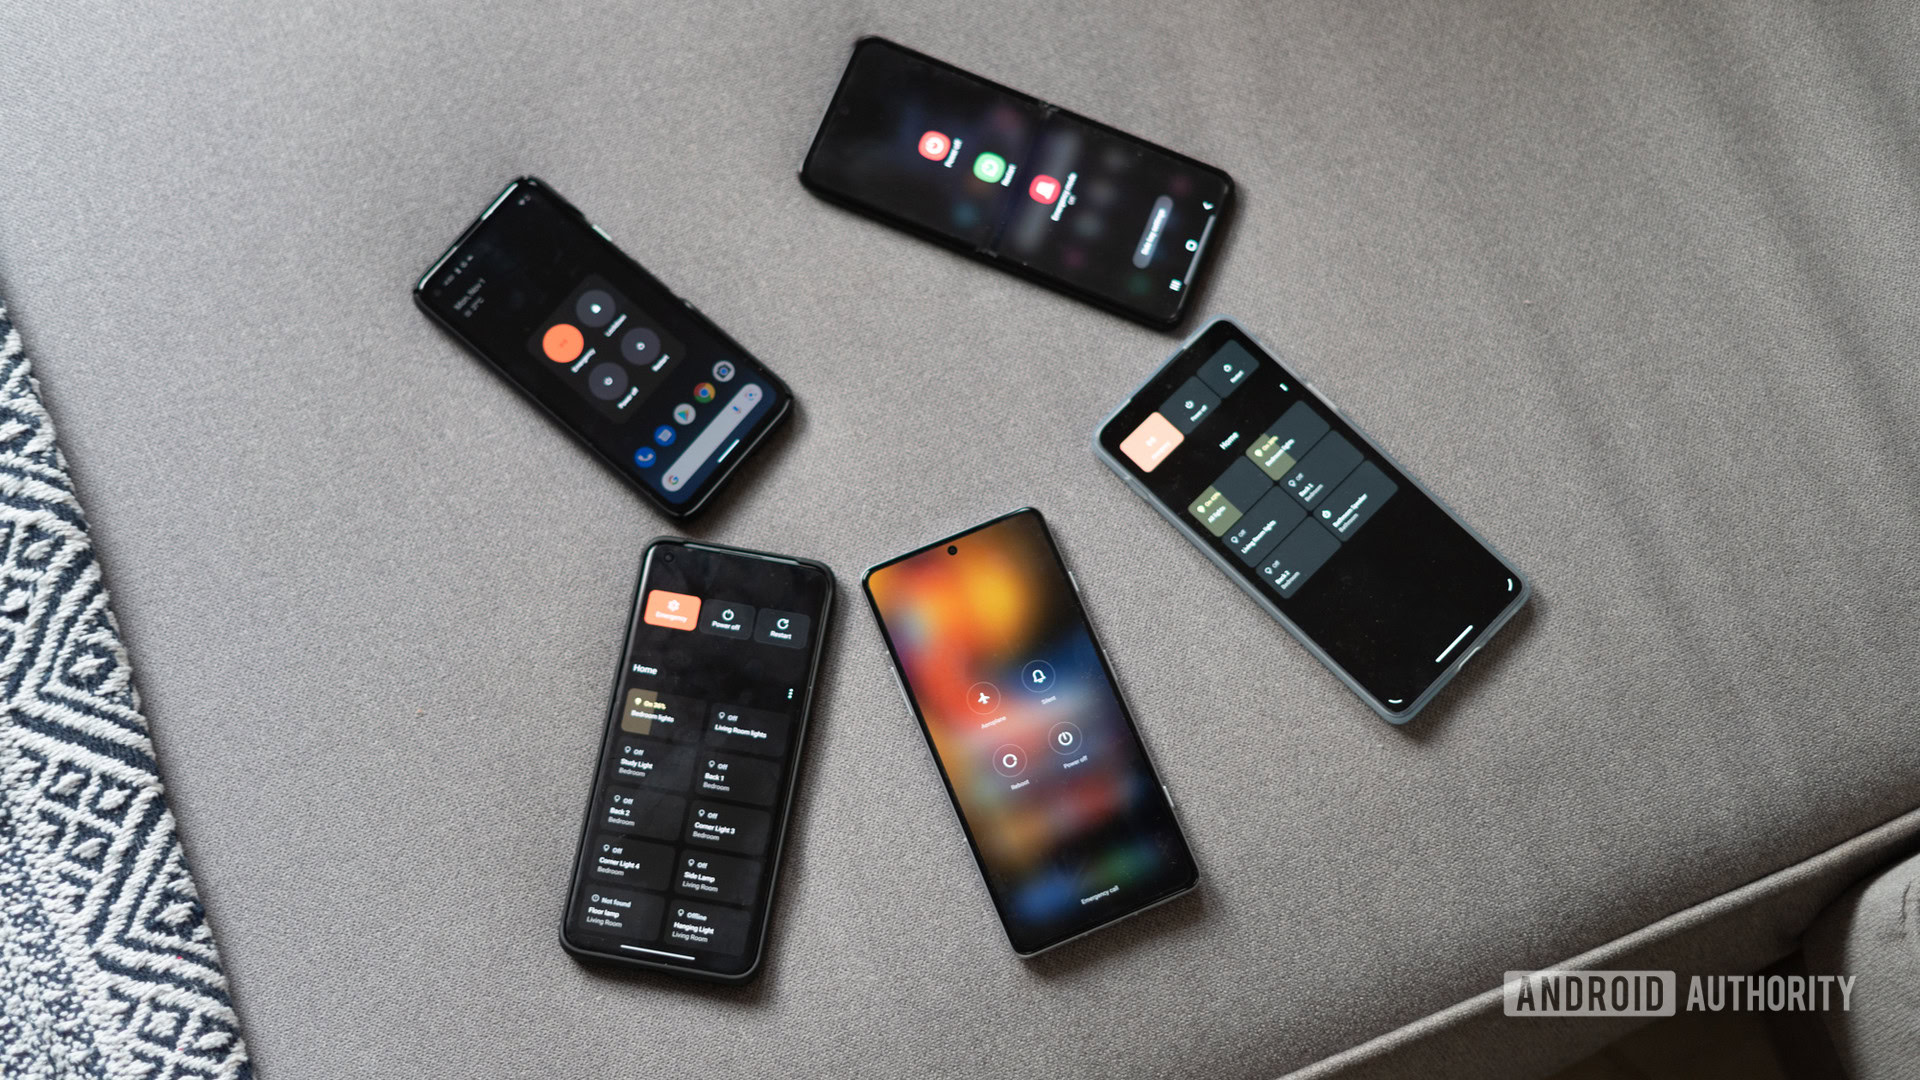 power buttons on android phones from top to bottom showing multiple phones